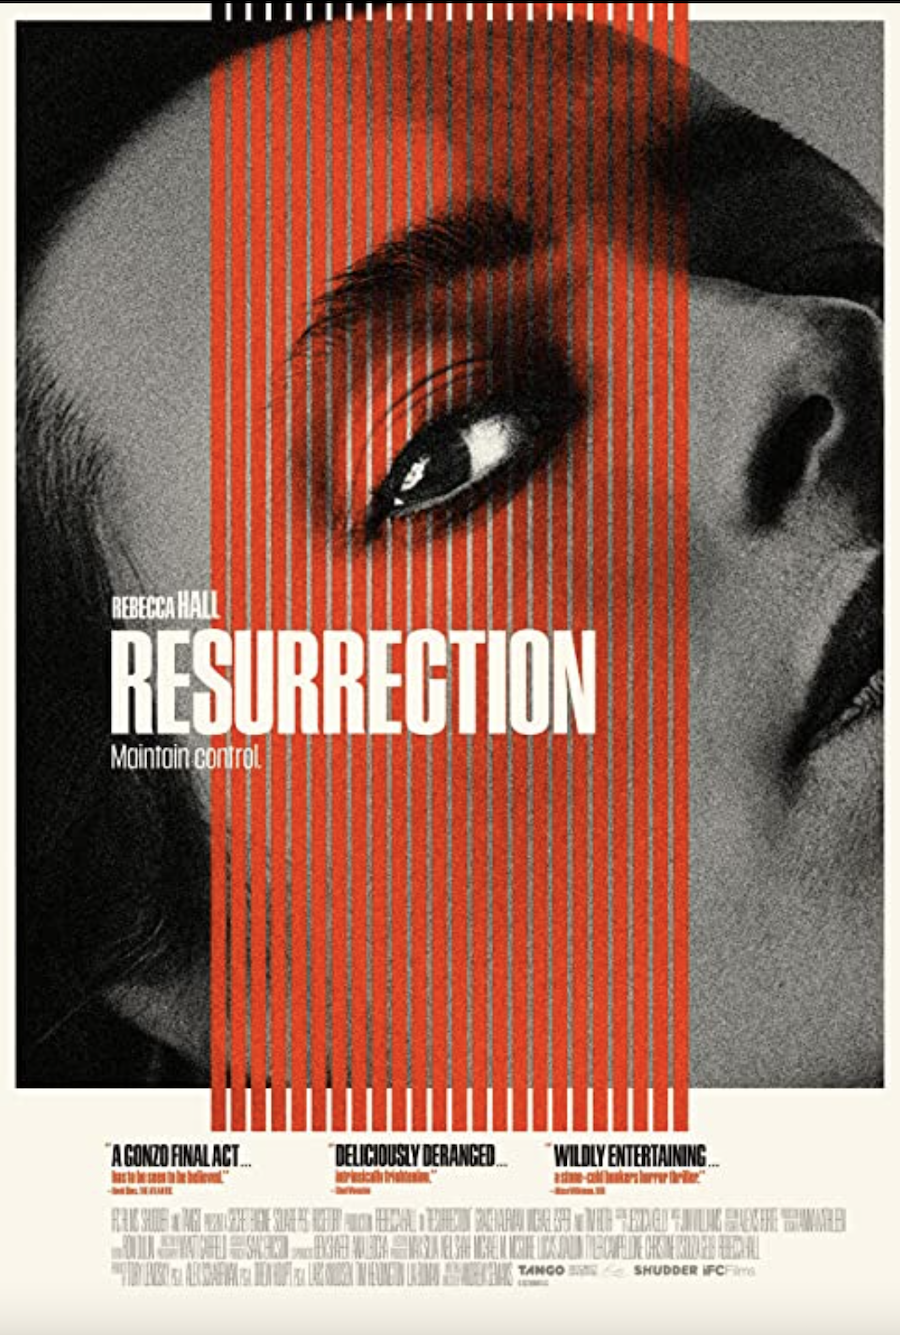 Ressurection Poster.png